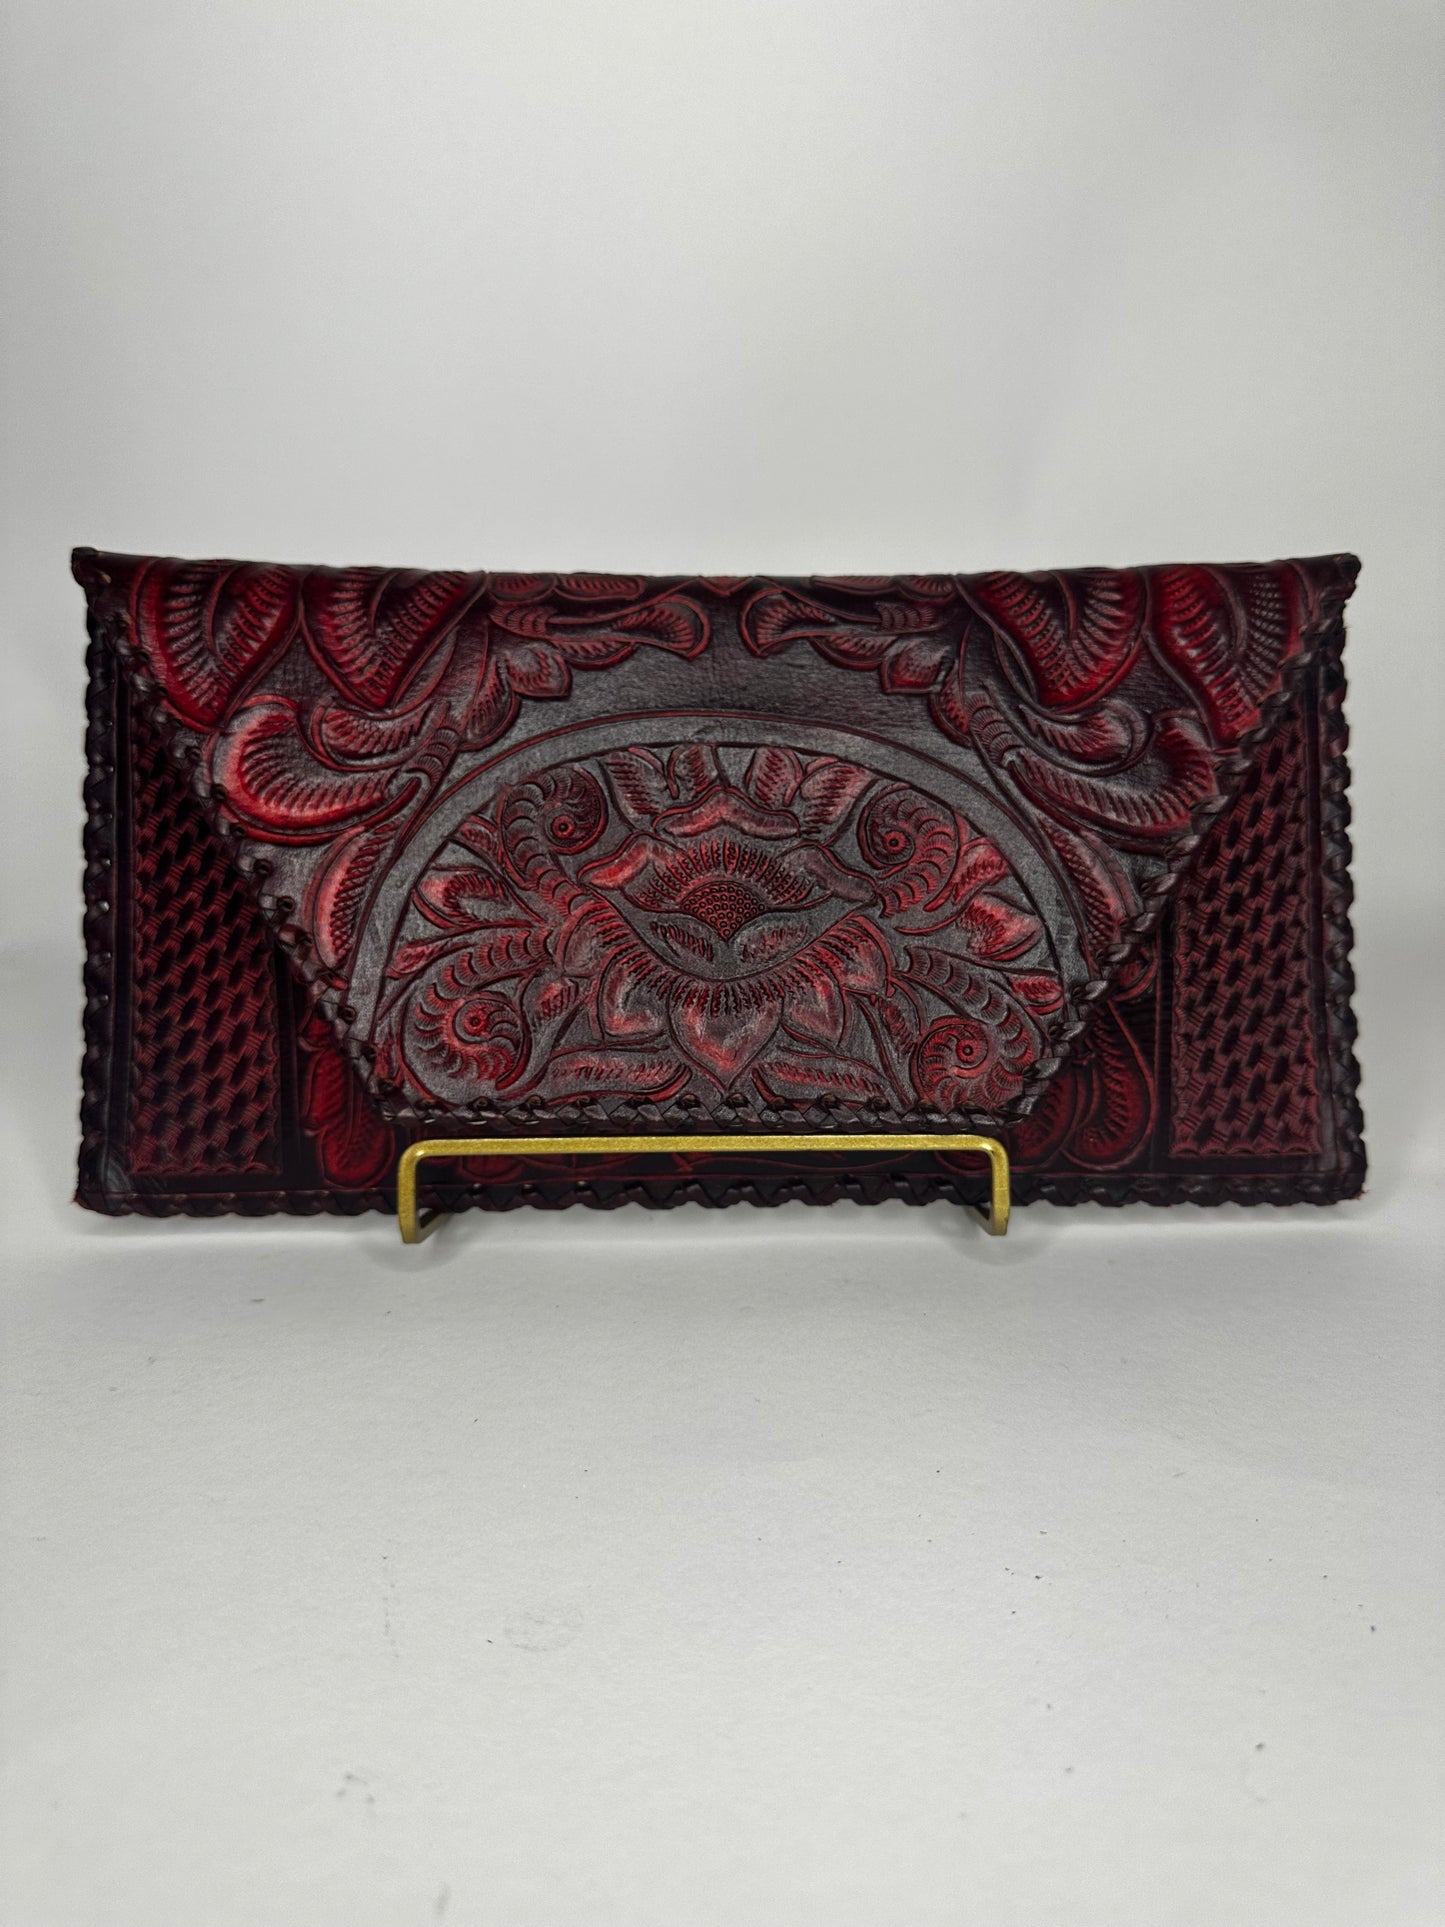 Handmade Mexican authentic leather clutch with floral design etched on top flap. Squared design etched on bottom half. Color wine red.